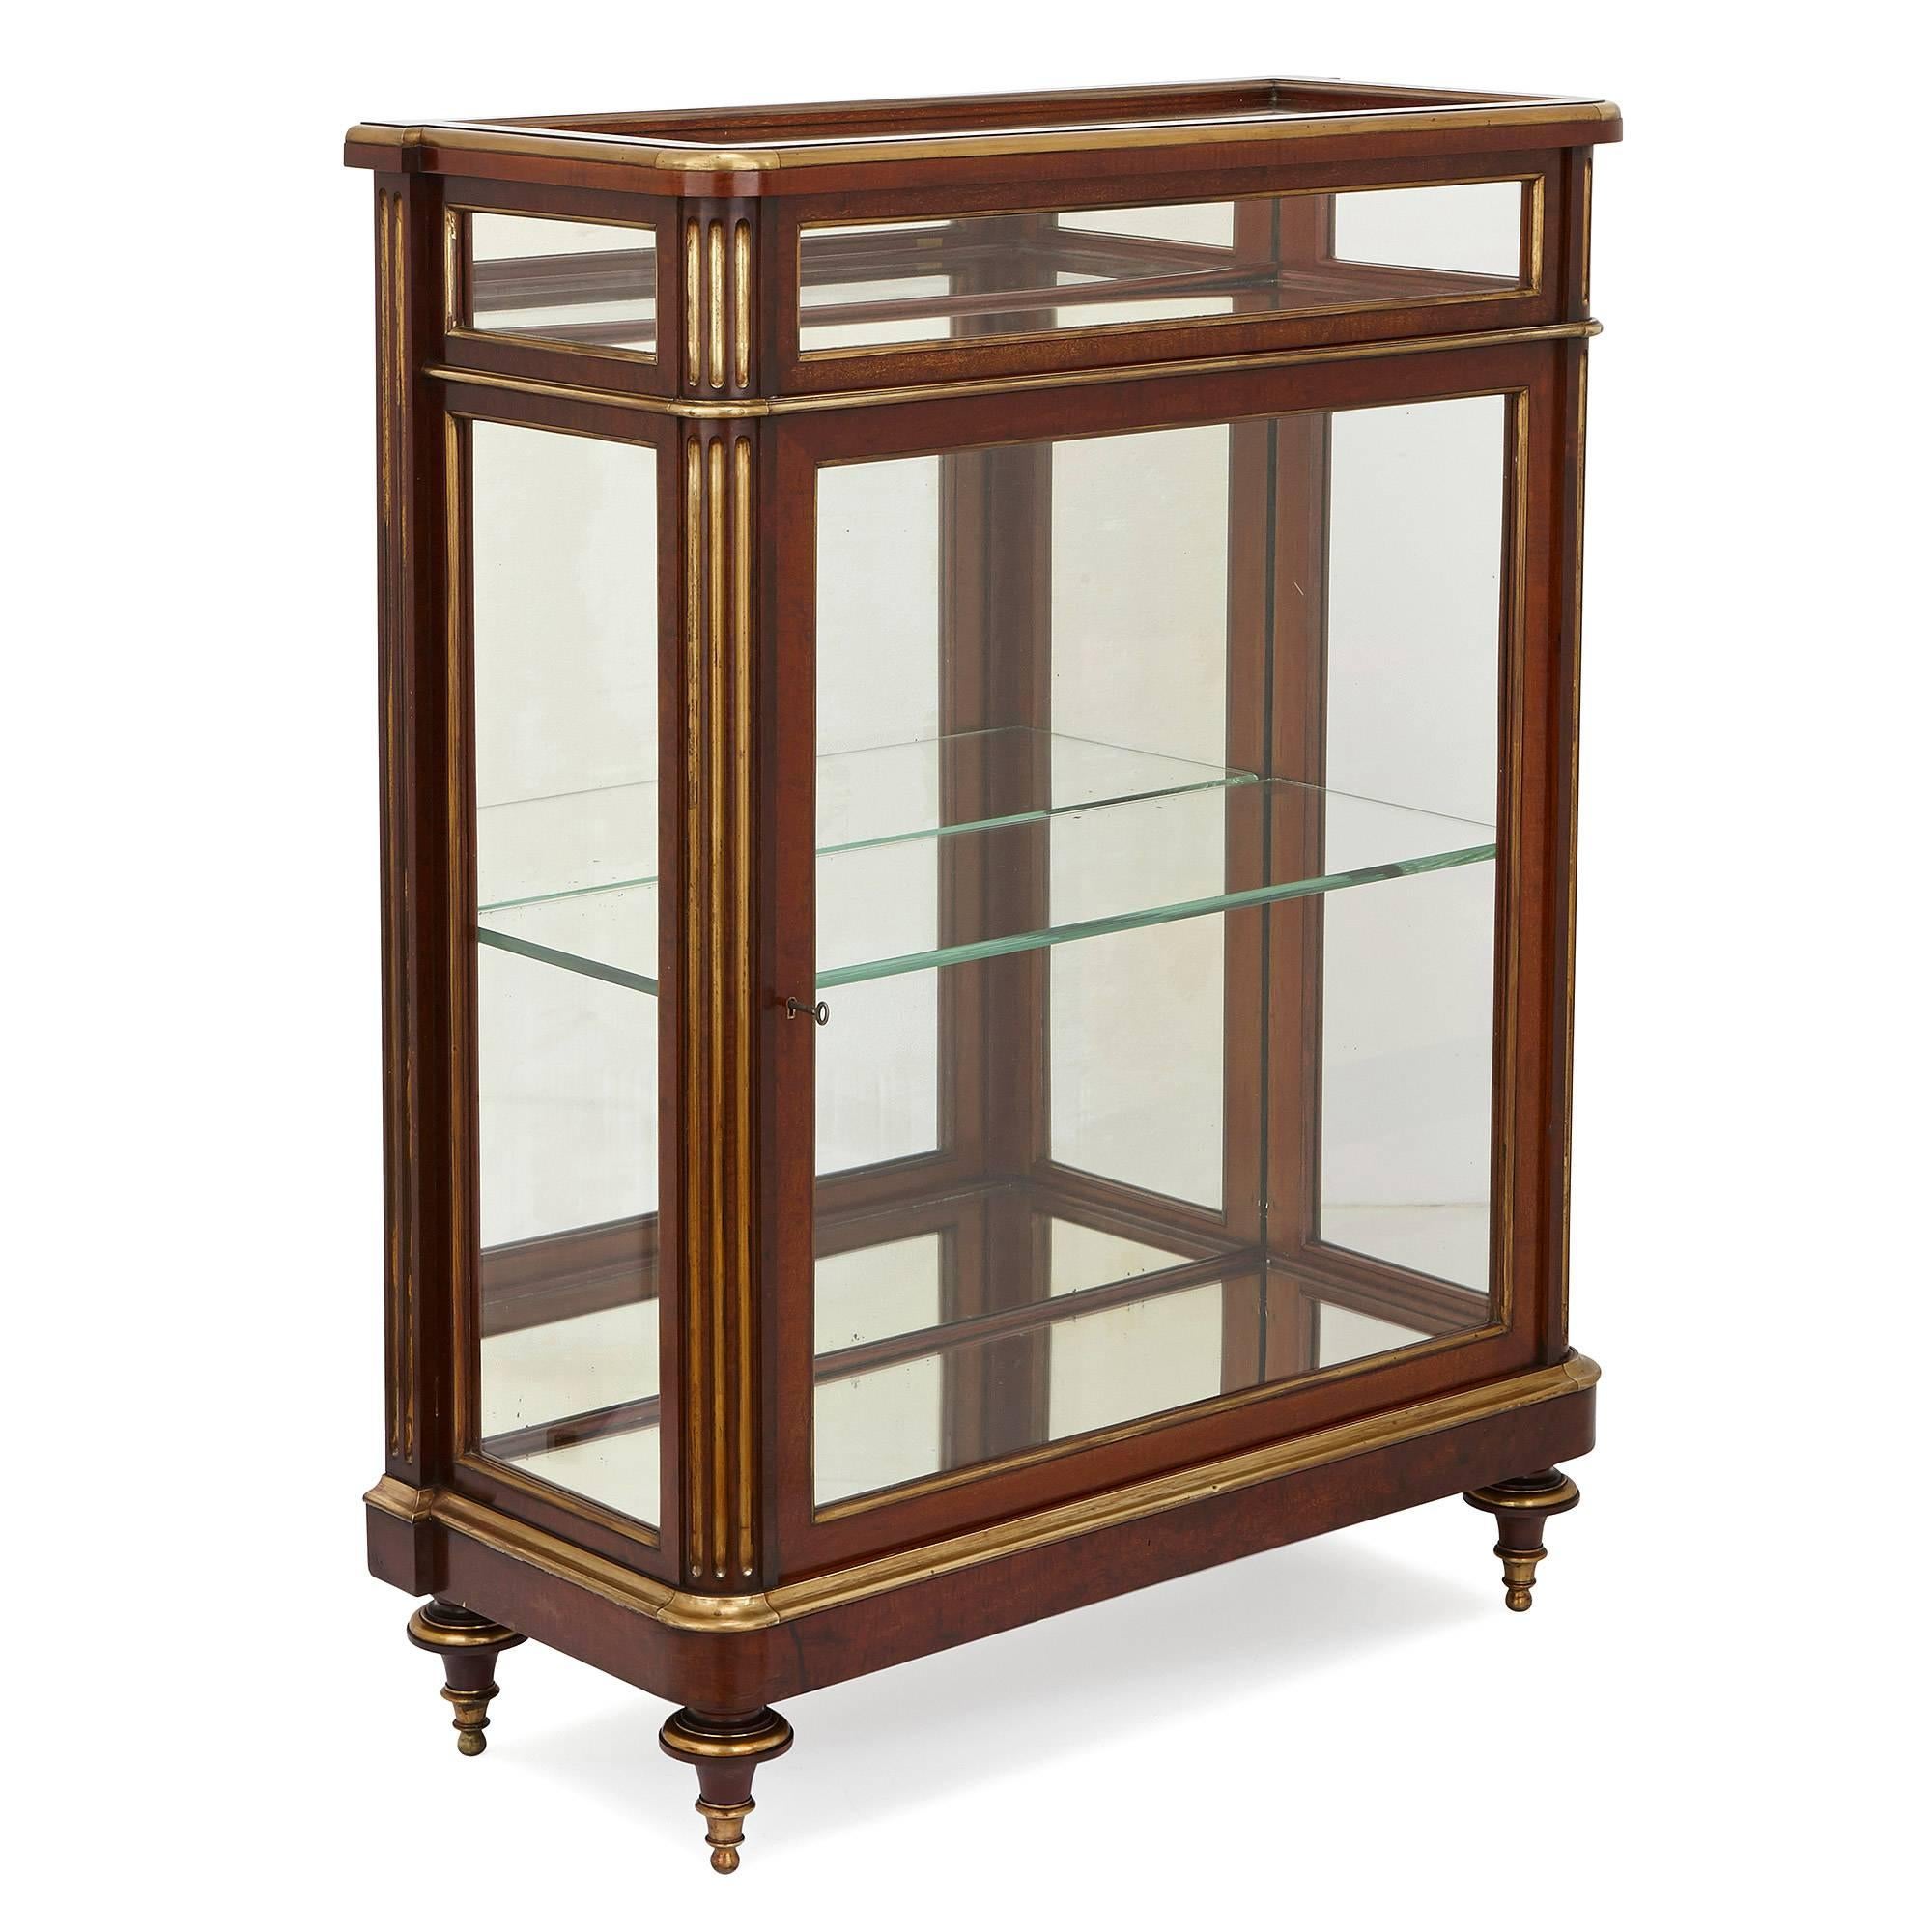 These refined display cabinets, or vitrines, are perfect for elegantly complimenting the display of trinkets without outshining them. The cabinets are crafted in rectangular form from mahogany and highlighted with gleaming brass. Set on four toupie